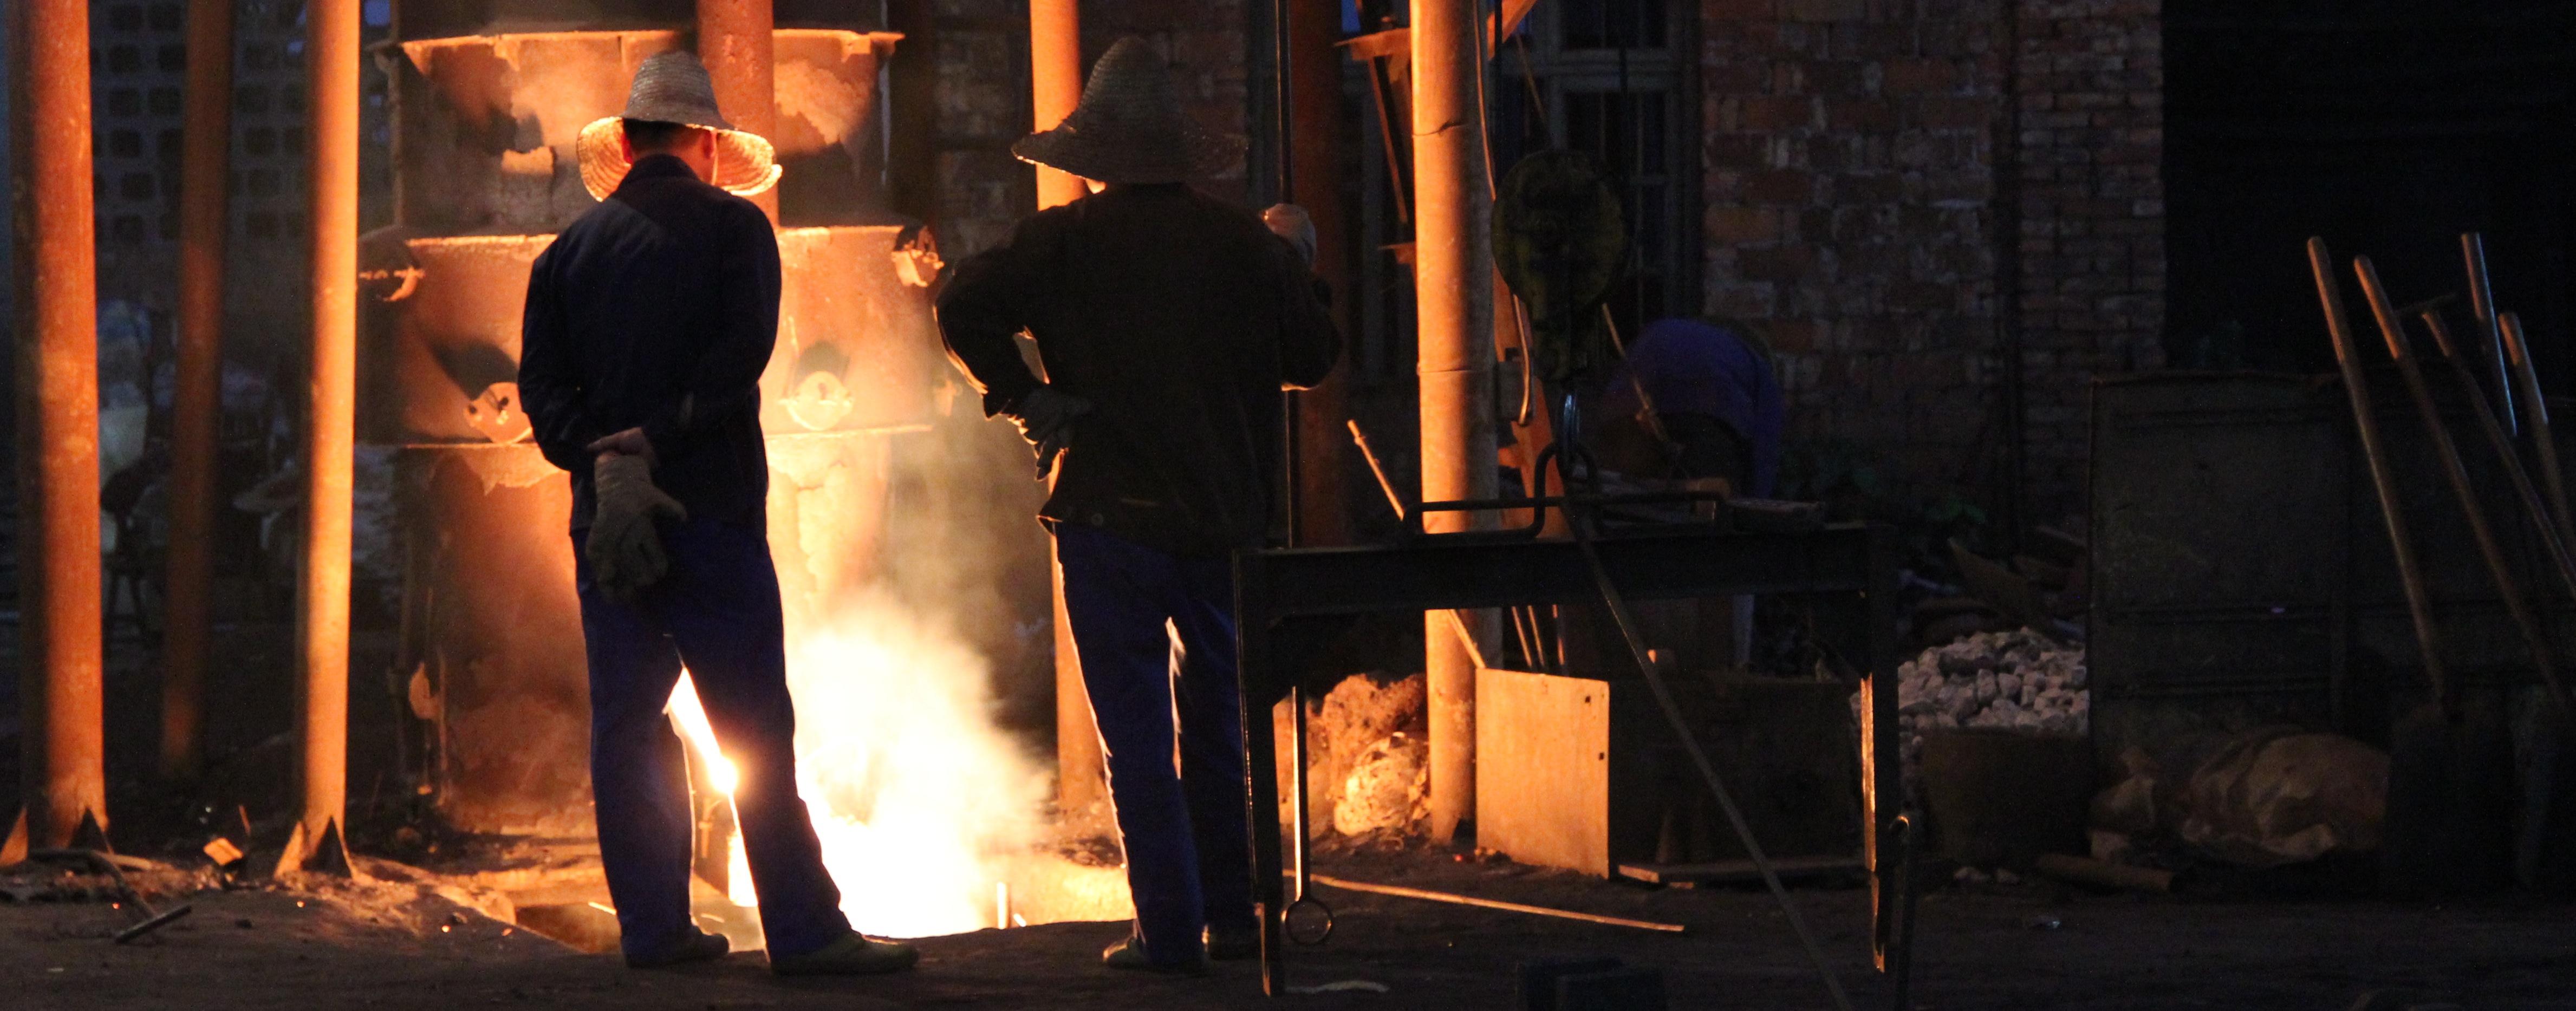 Two people overlook hot molten iron in a foundry.